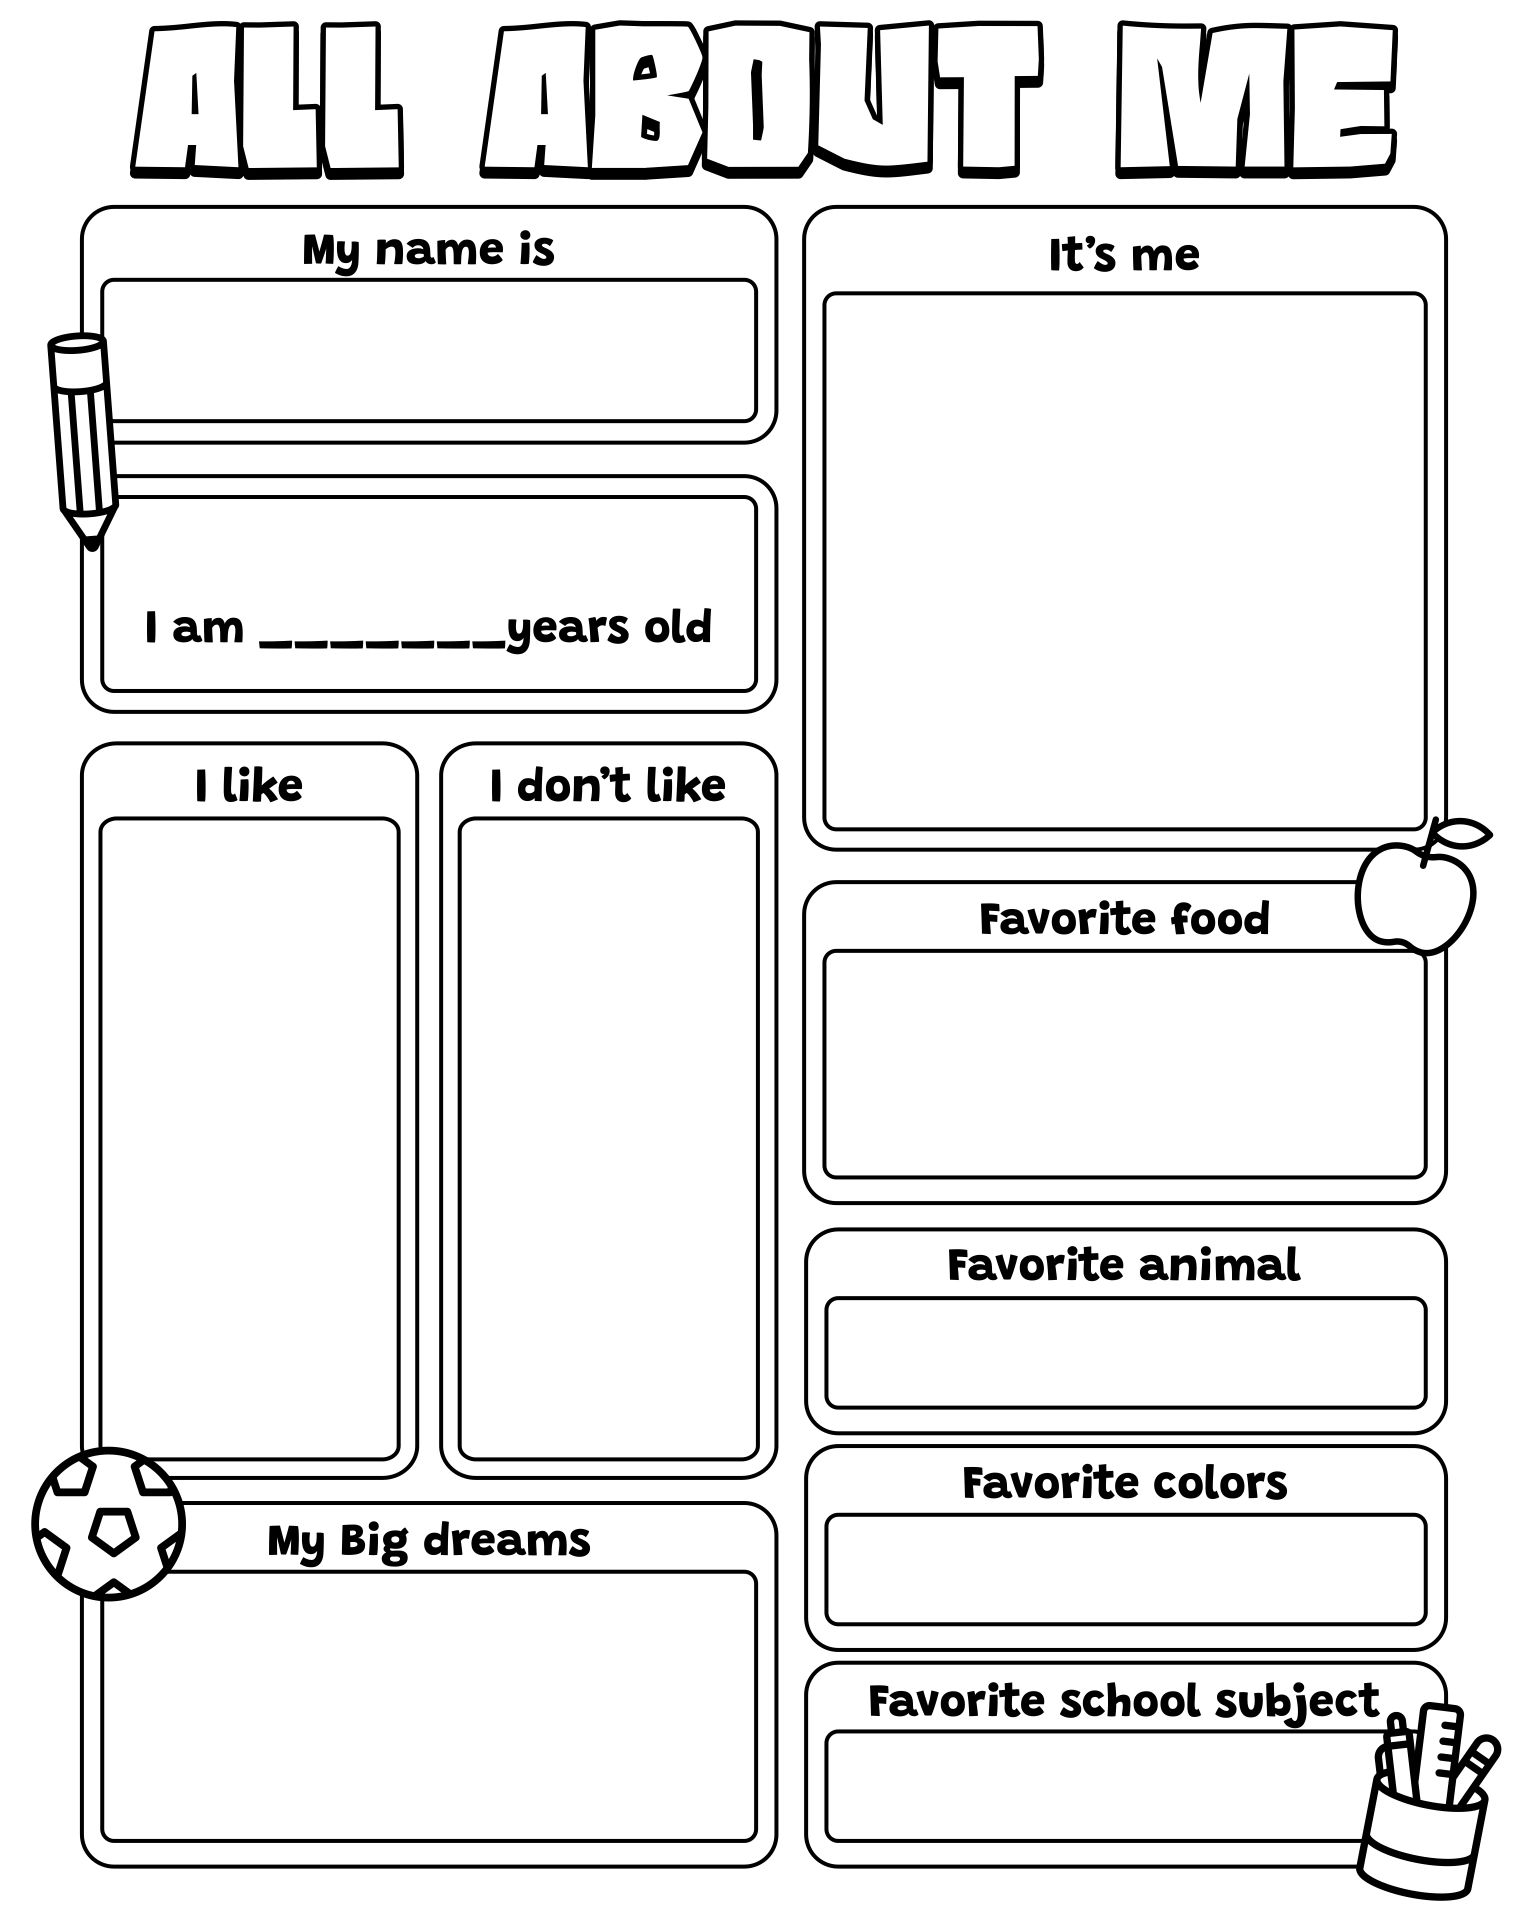 9-best-images-of-about-me-worksheets-printable-all-about-me